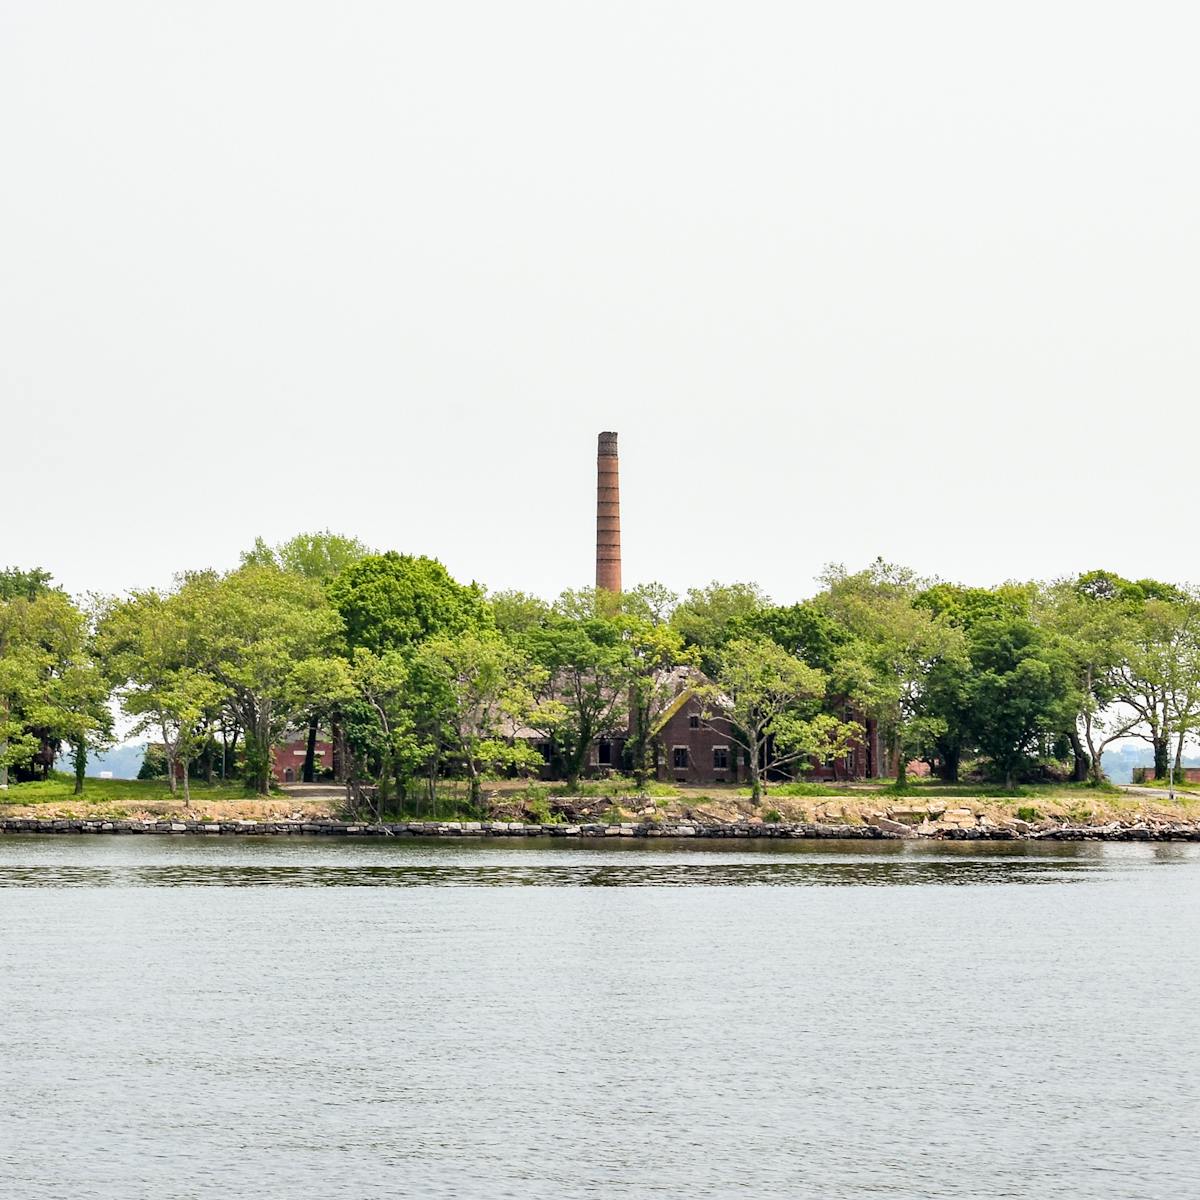 Photograph of a small island. The lower half of the image is water, the upper half and overcast sky. Across the centre of the image is the island, covered in green trees and several 2 and 3 storey buildings and a tall chimney in the centre.